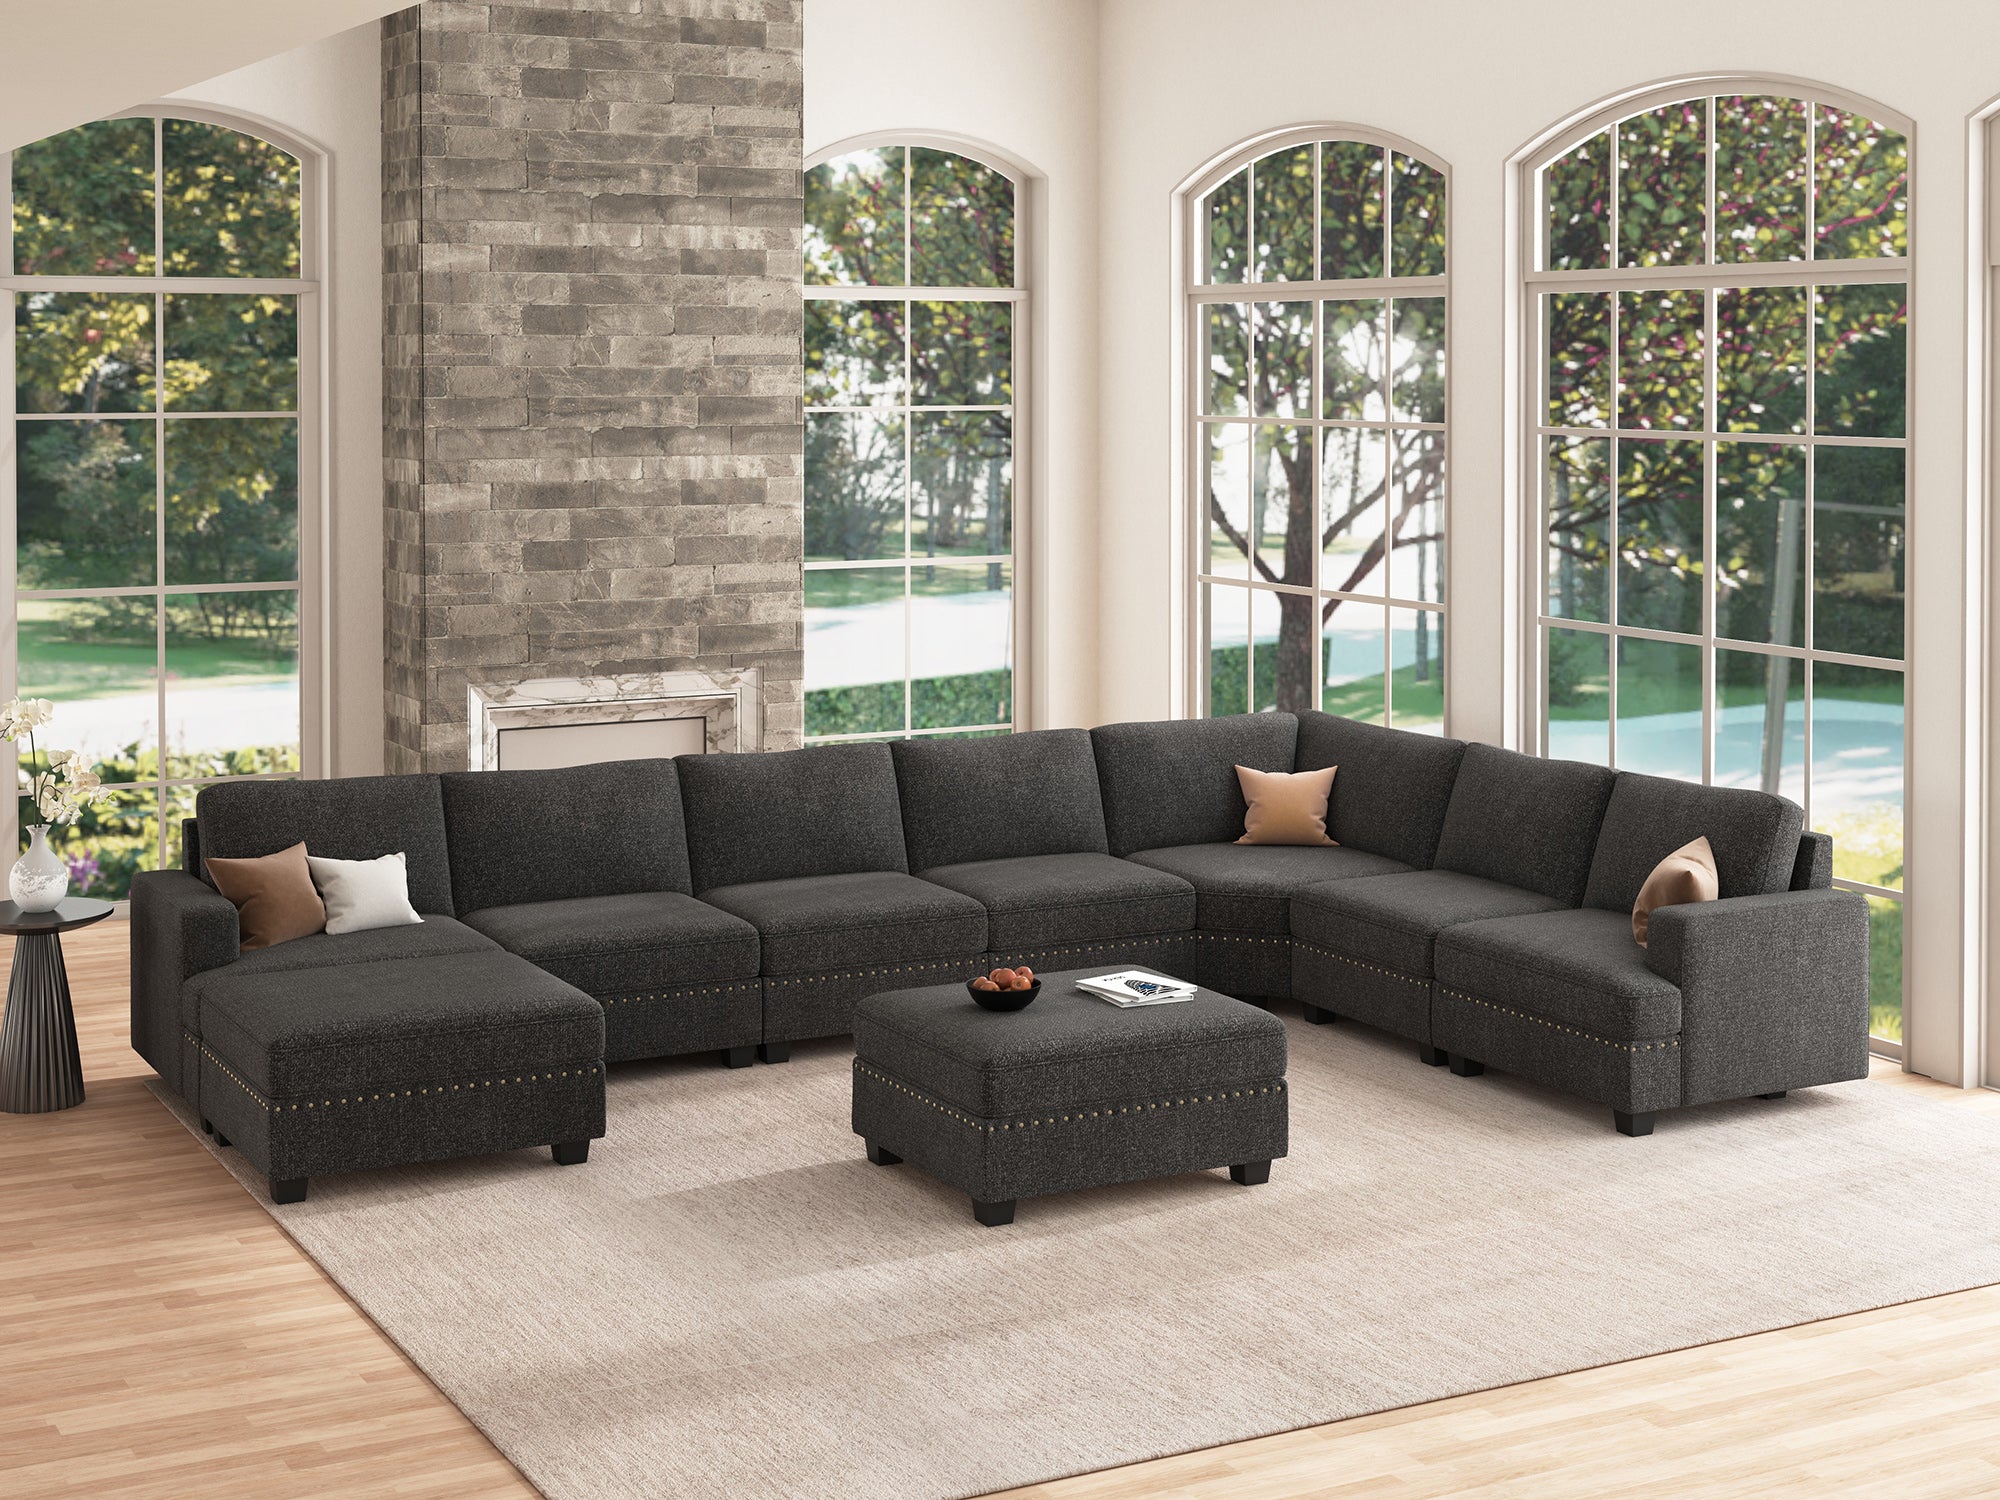 NOLANY 7-Seat Corner Modular Sofa Oversized Sectional Sofa Couch with Two Storage Reversible Ottoman #Color_Dark Grey